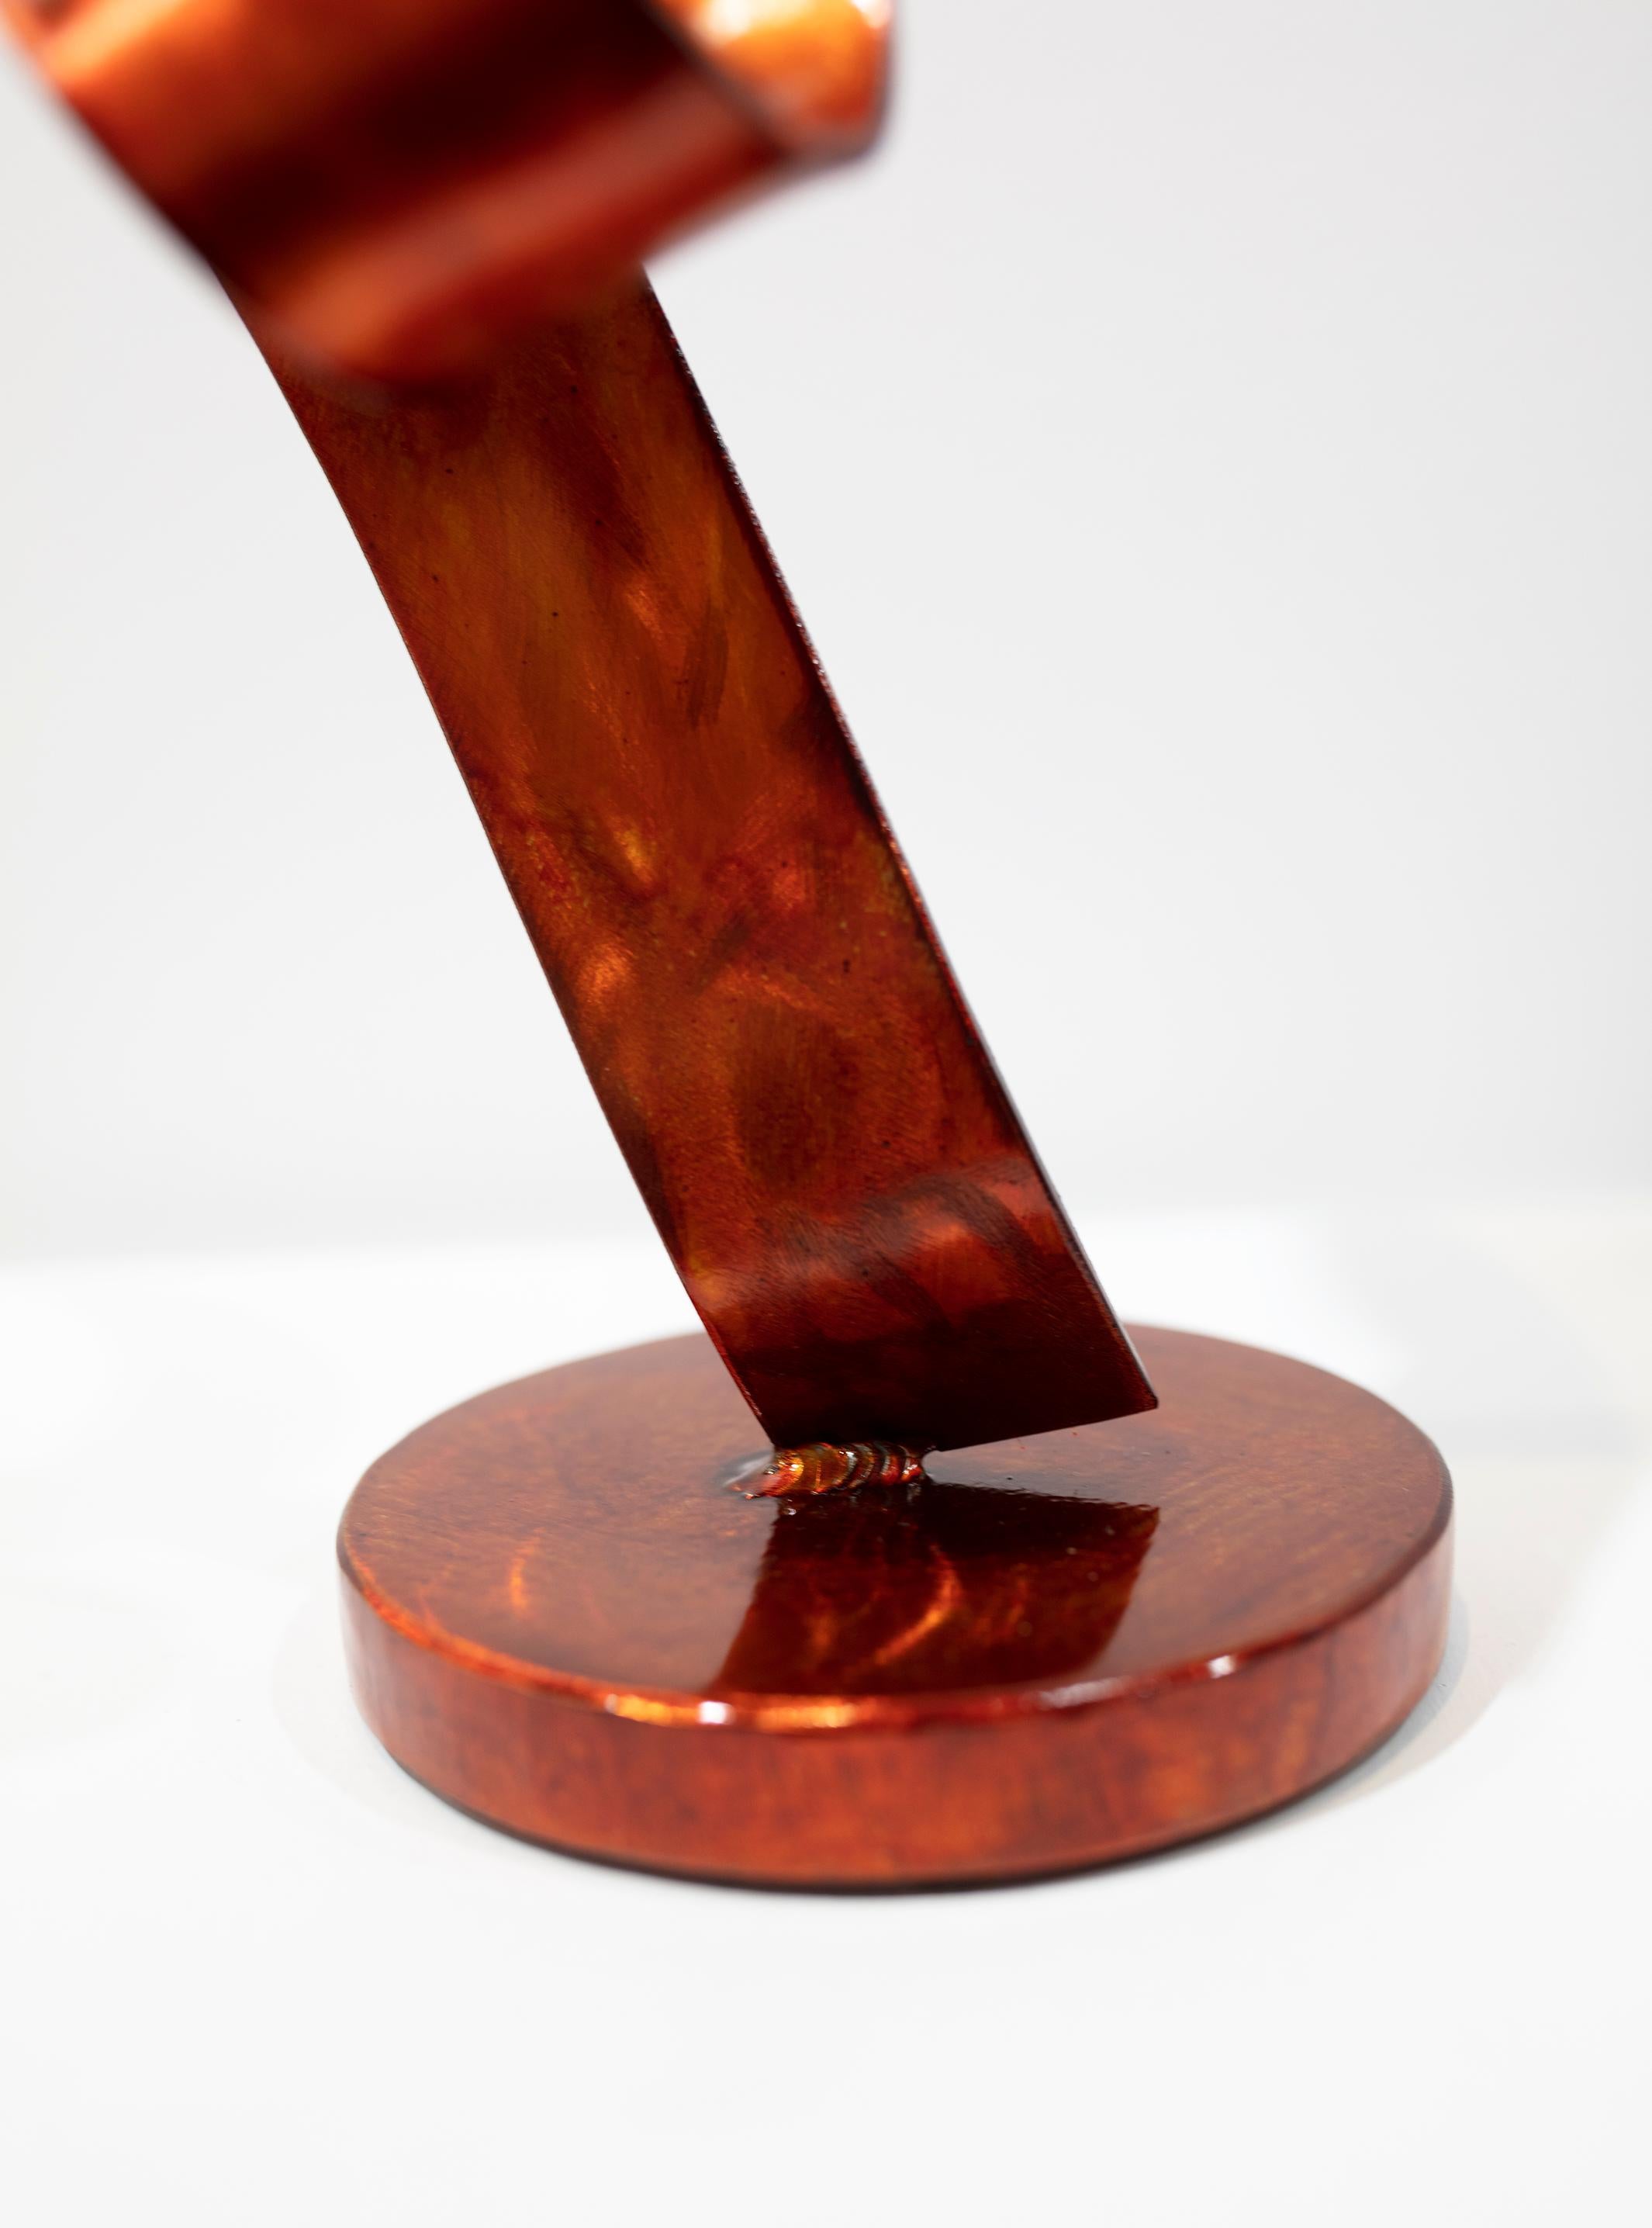 Orange Swirl is a tabletop sculpture made out of steel with an orange dye and clear coat. 

Connecticut sculptor Joe Sorge says about his work, 